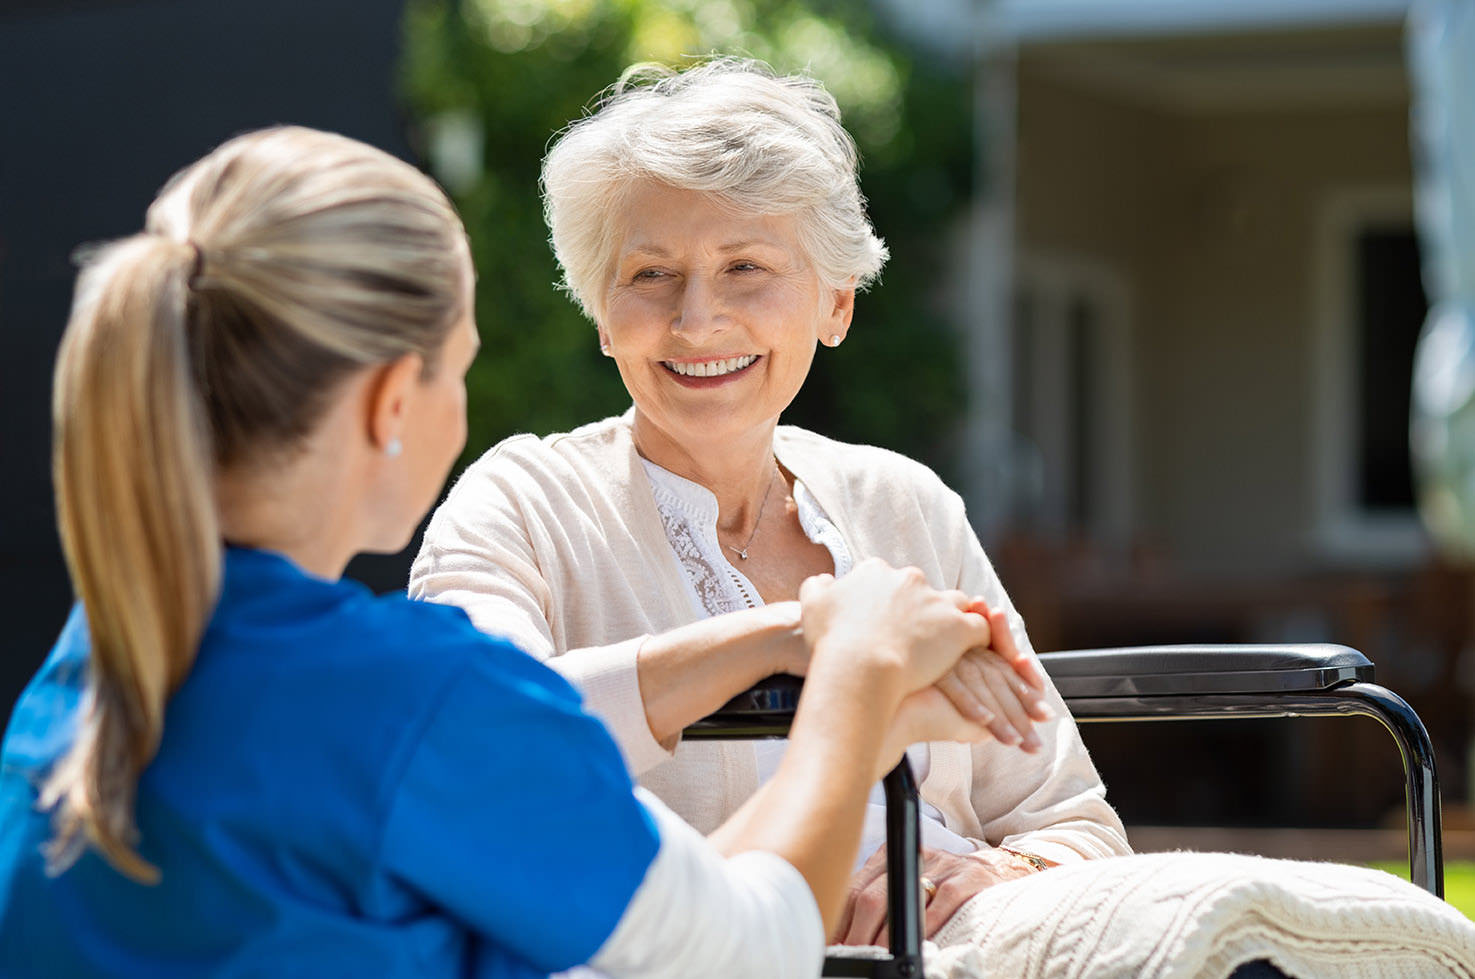 Top 5 Things To Consider When Choosing A Care Home